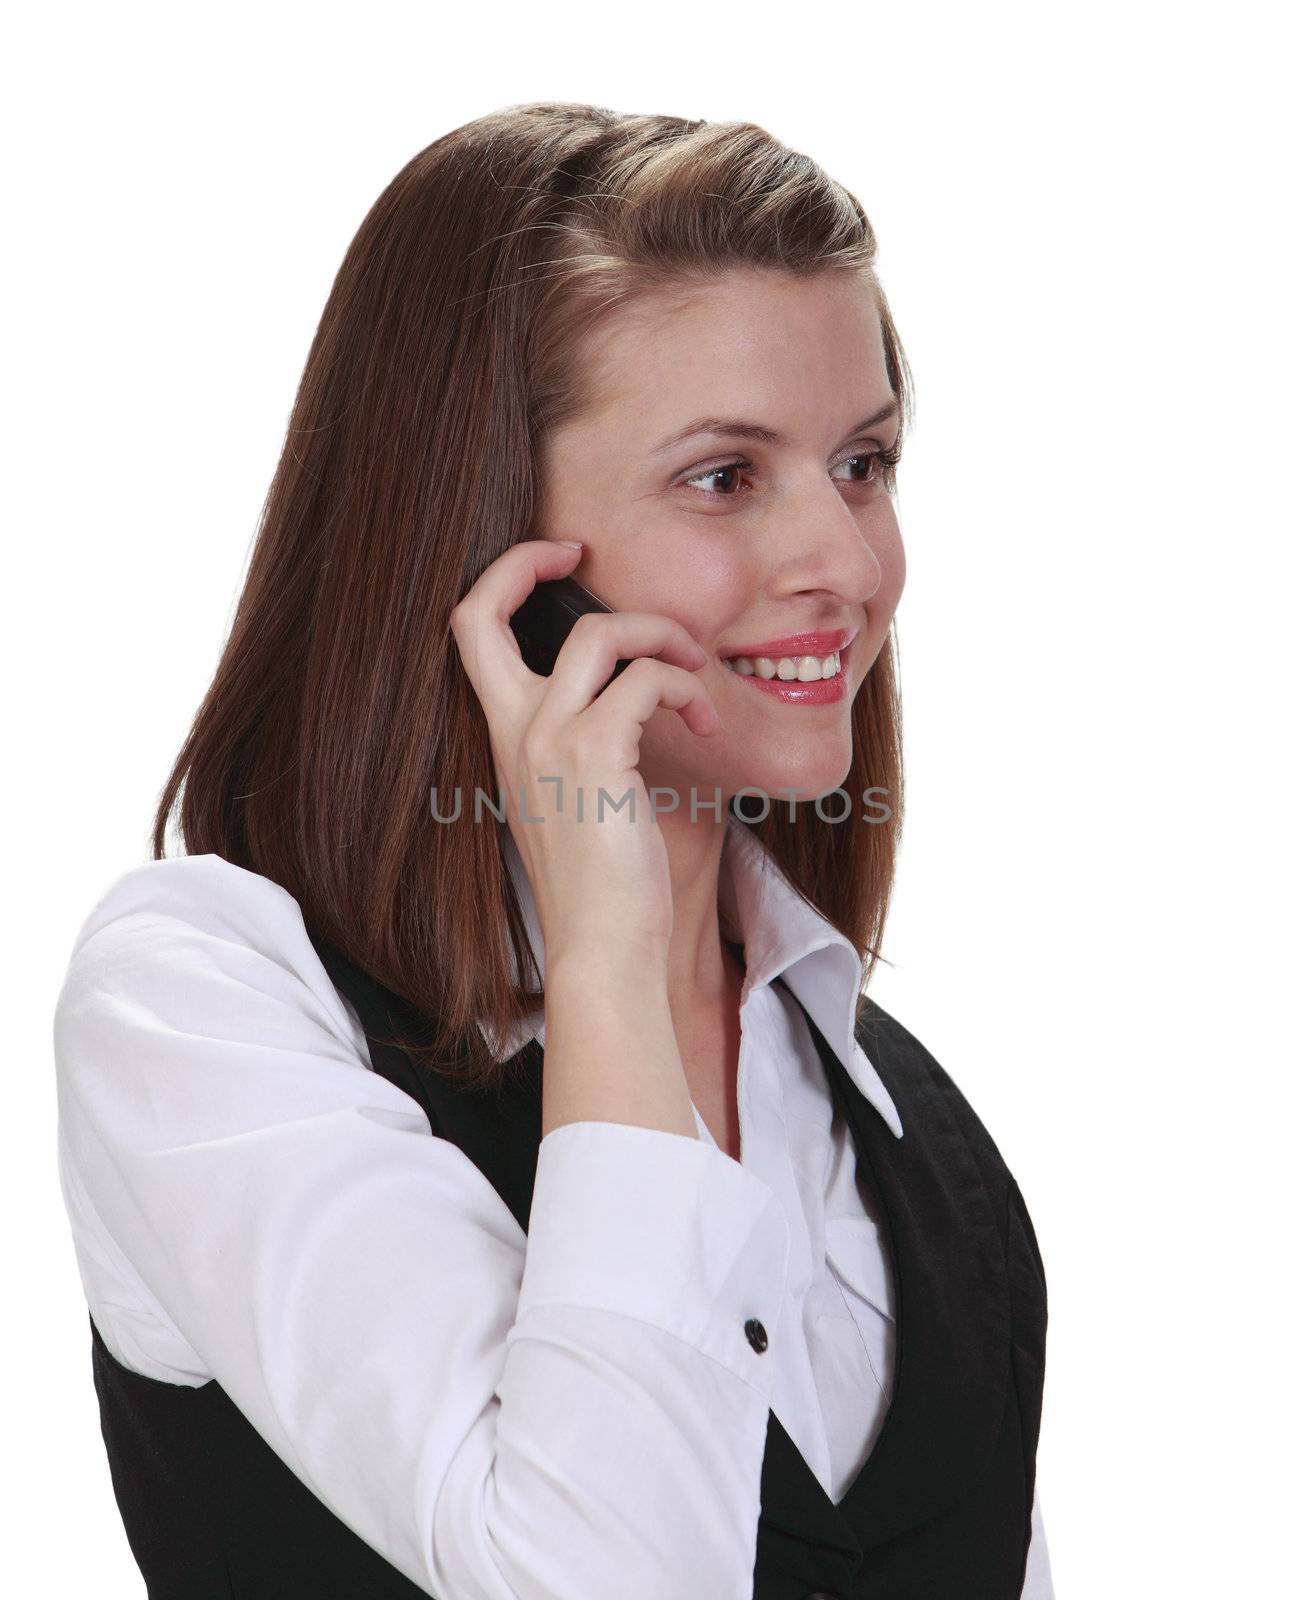 Portrait of a young woman on the phone, isolated against a white background.